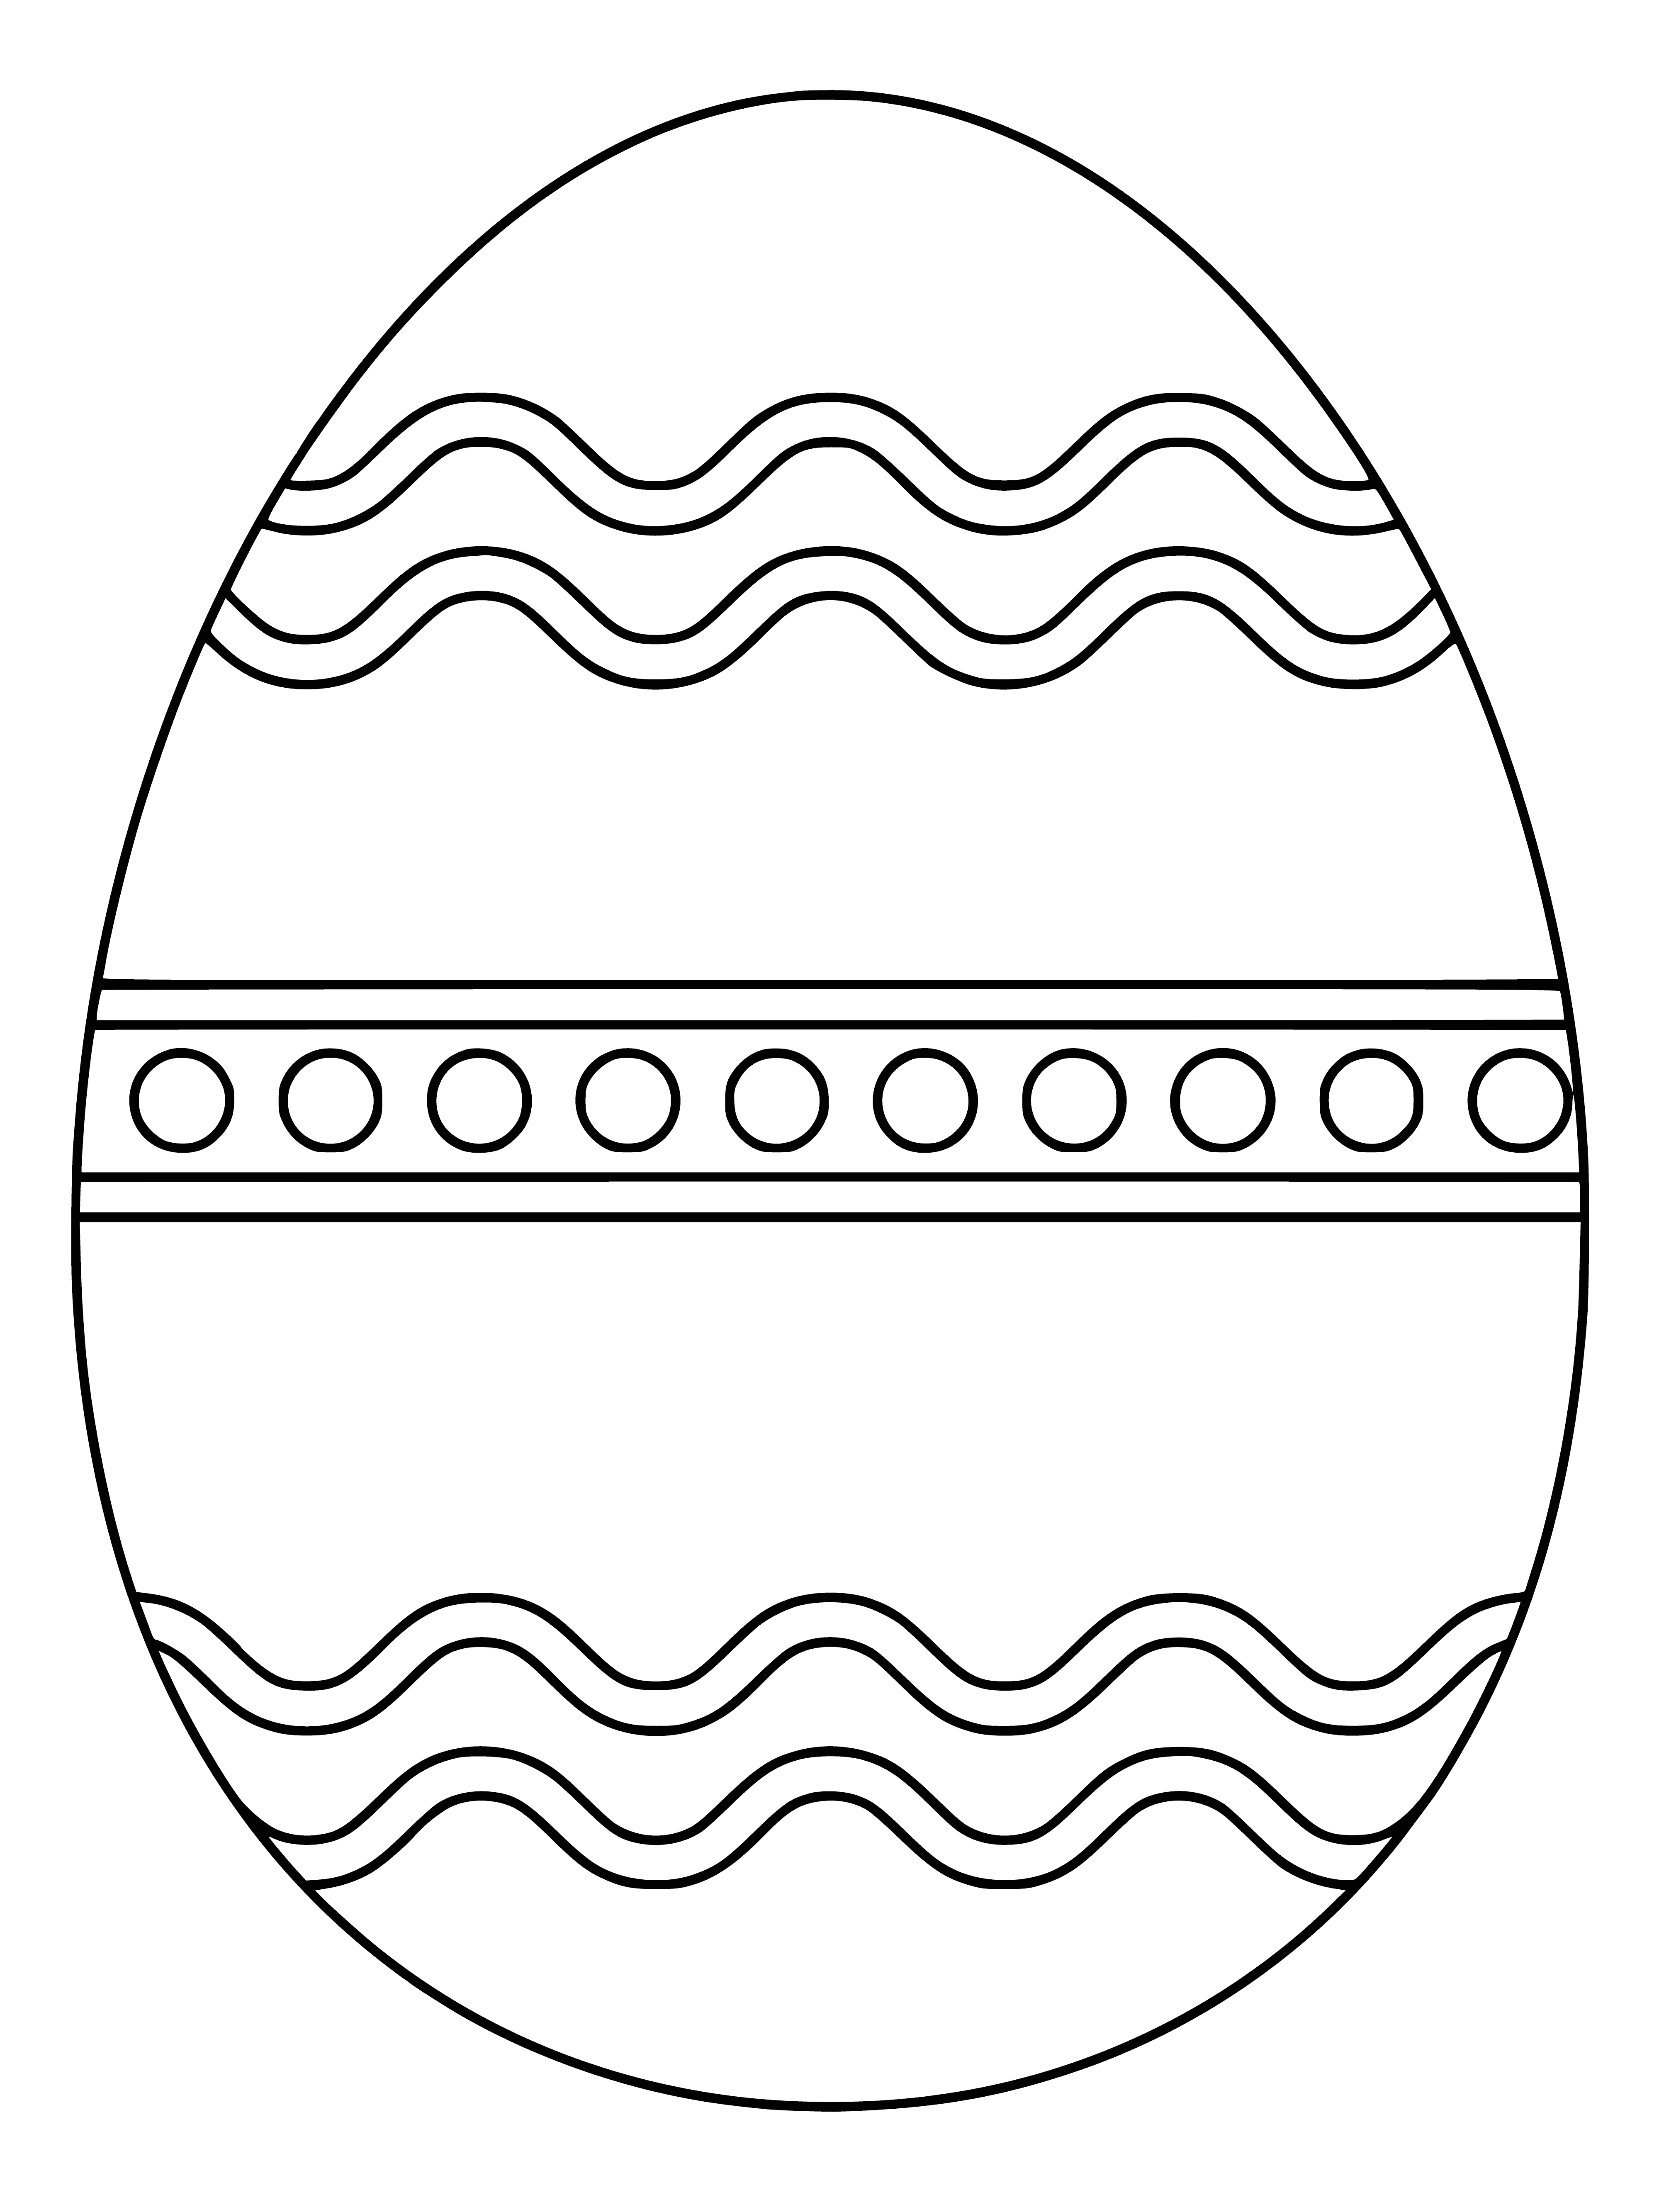 coloring page: -> Two decorated Easter Eggs: one yellow with green stripes, one purple with yellow spots, both have white designs.